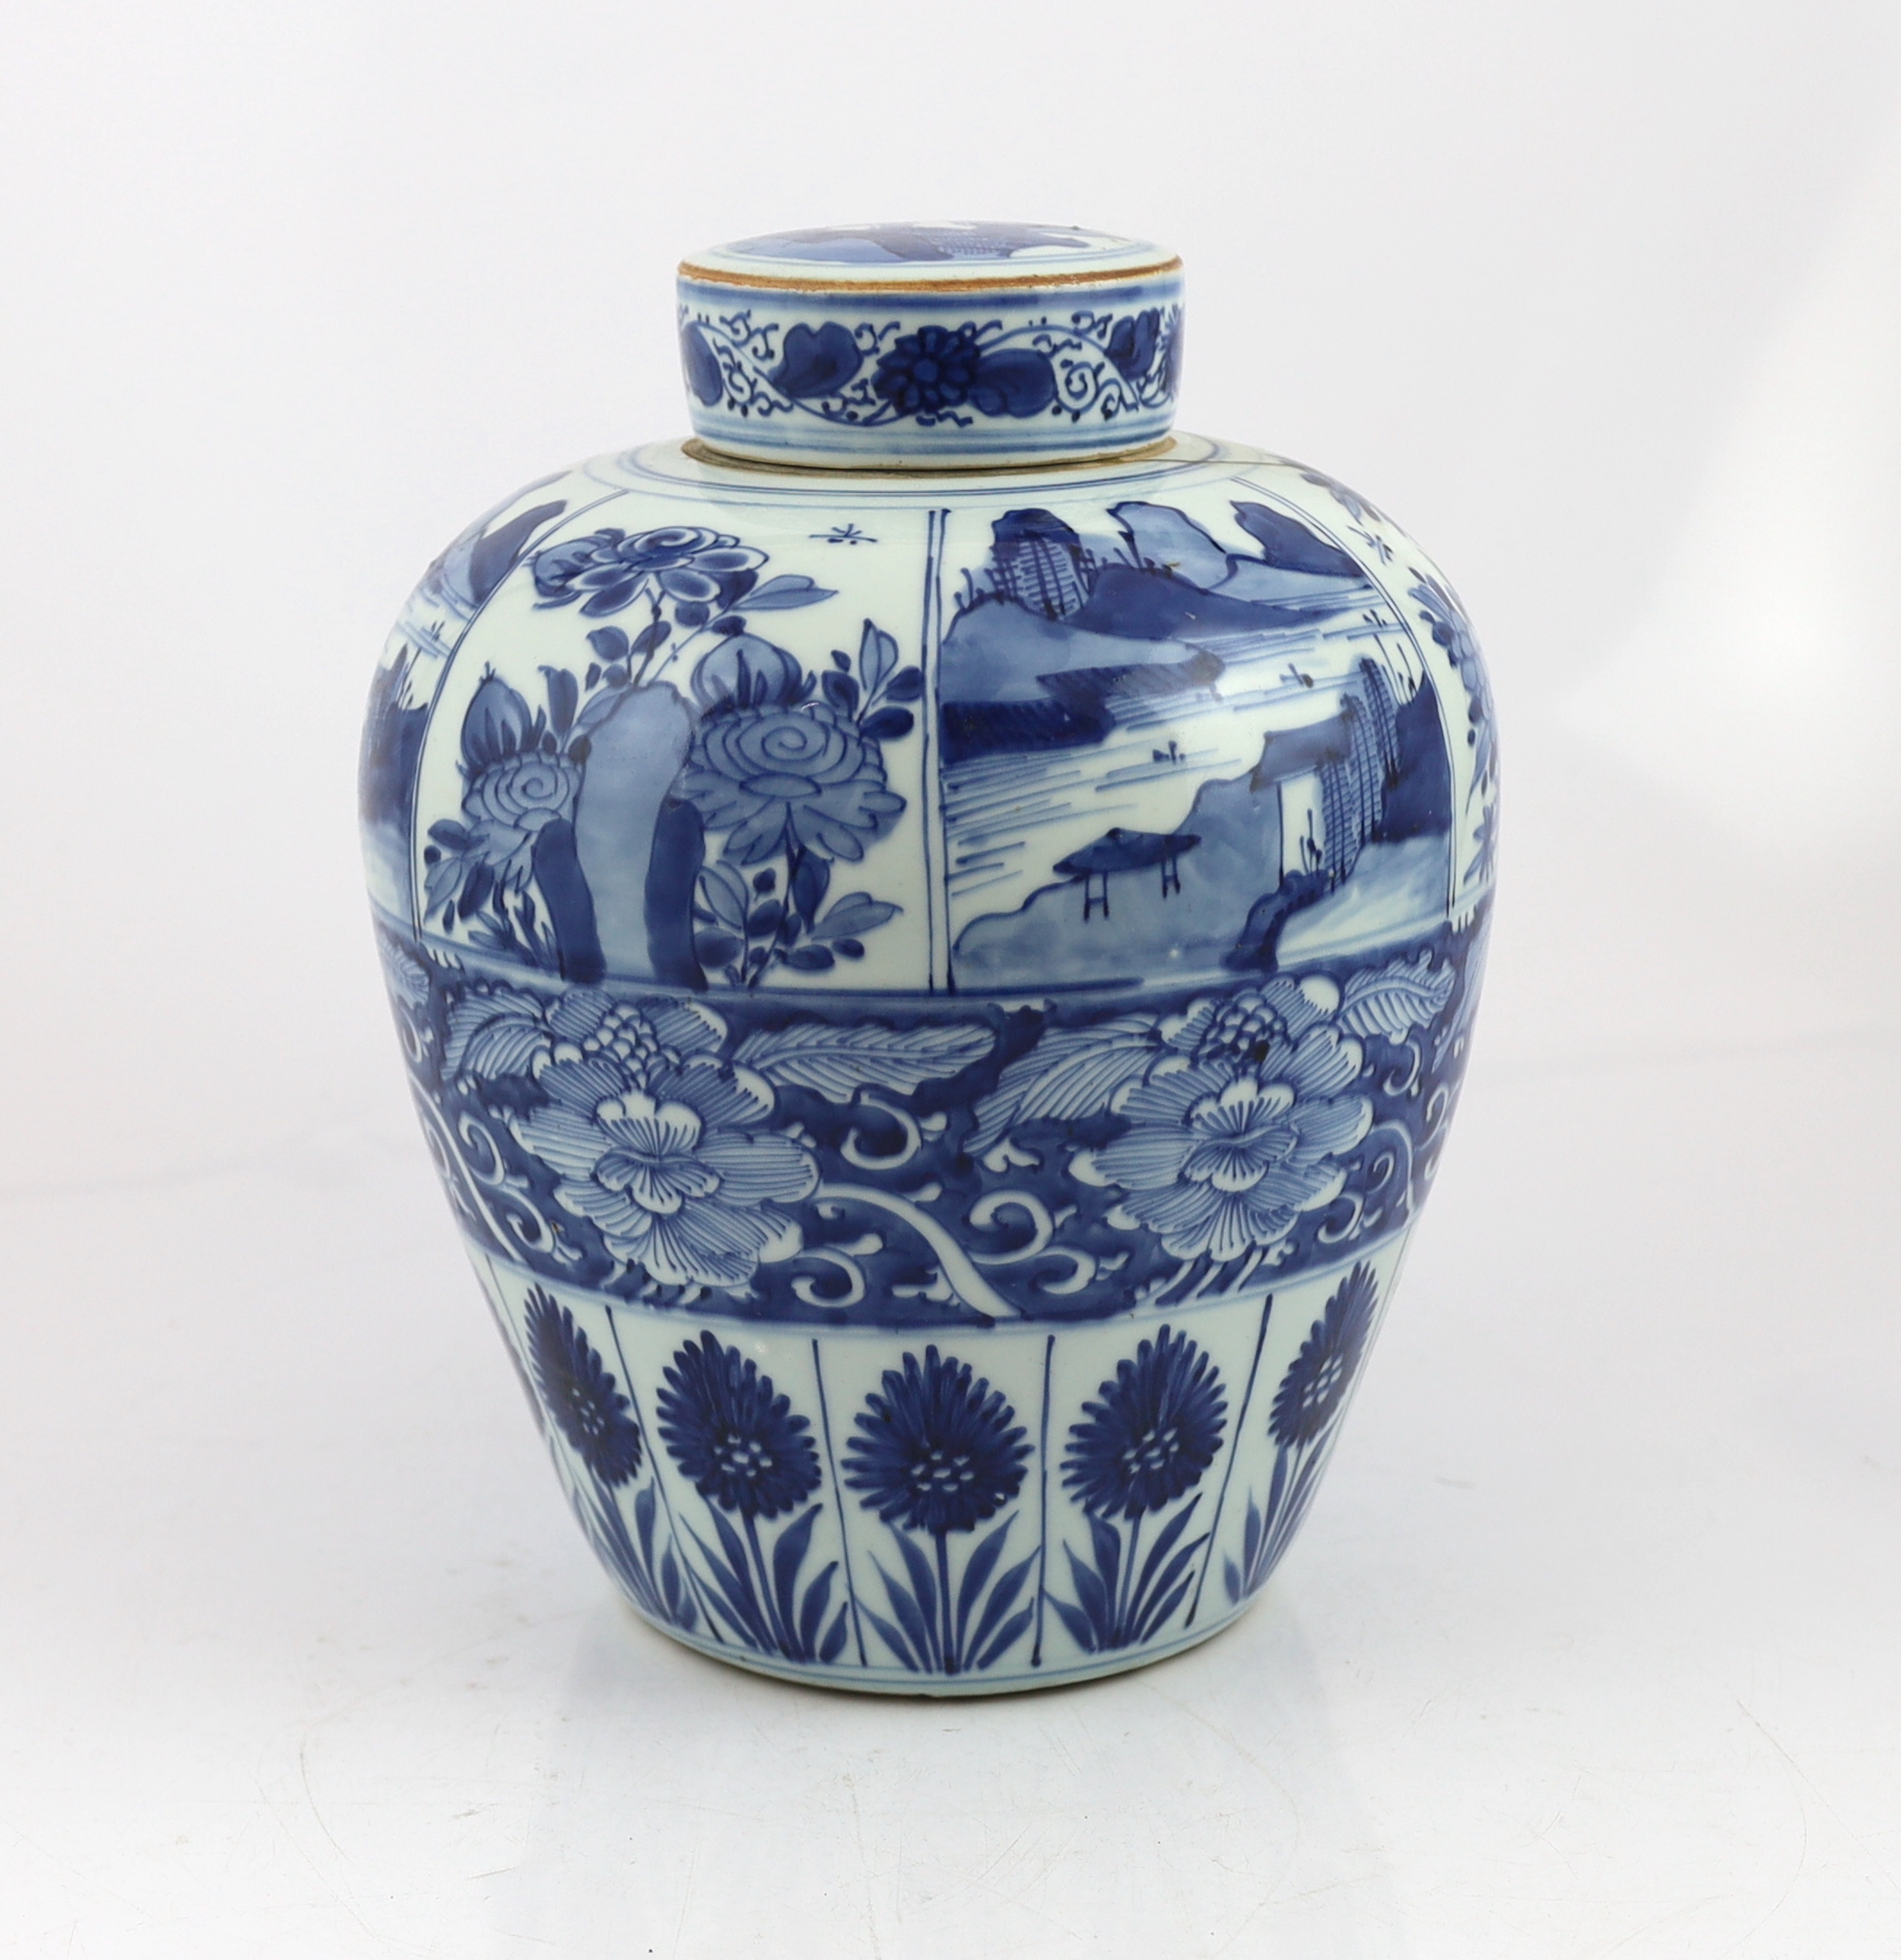 A Chinese blue and white ovoid jar and cover, Kangxi period, broken with kintsugi repair